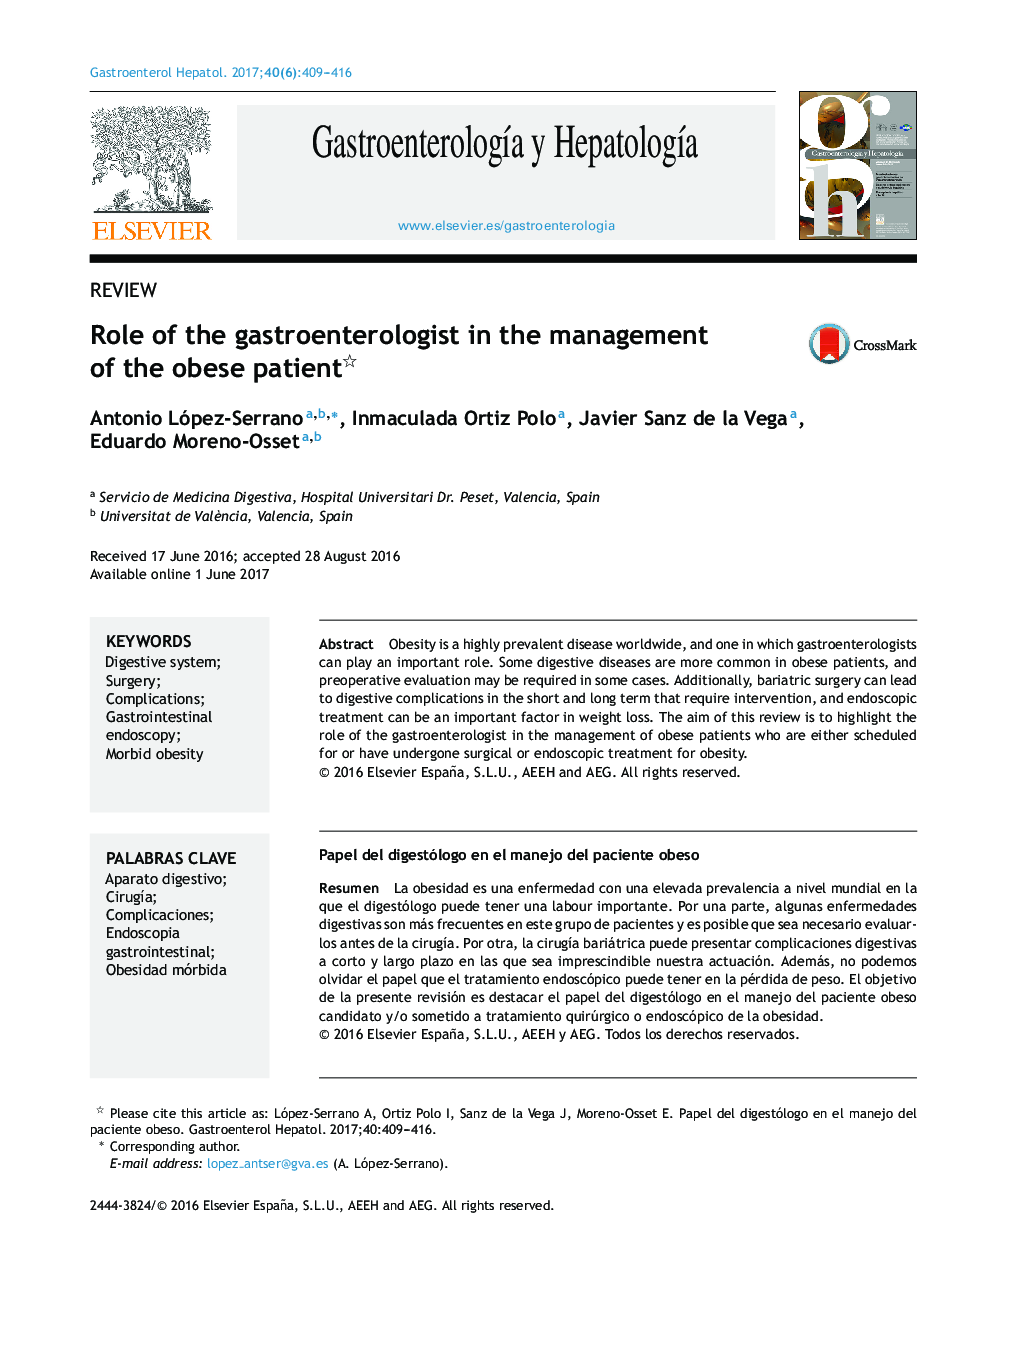 Role of the gastroenterologist in the management of the obese patient